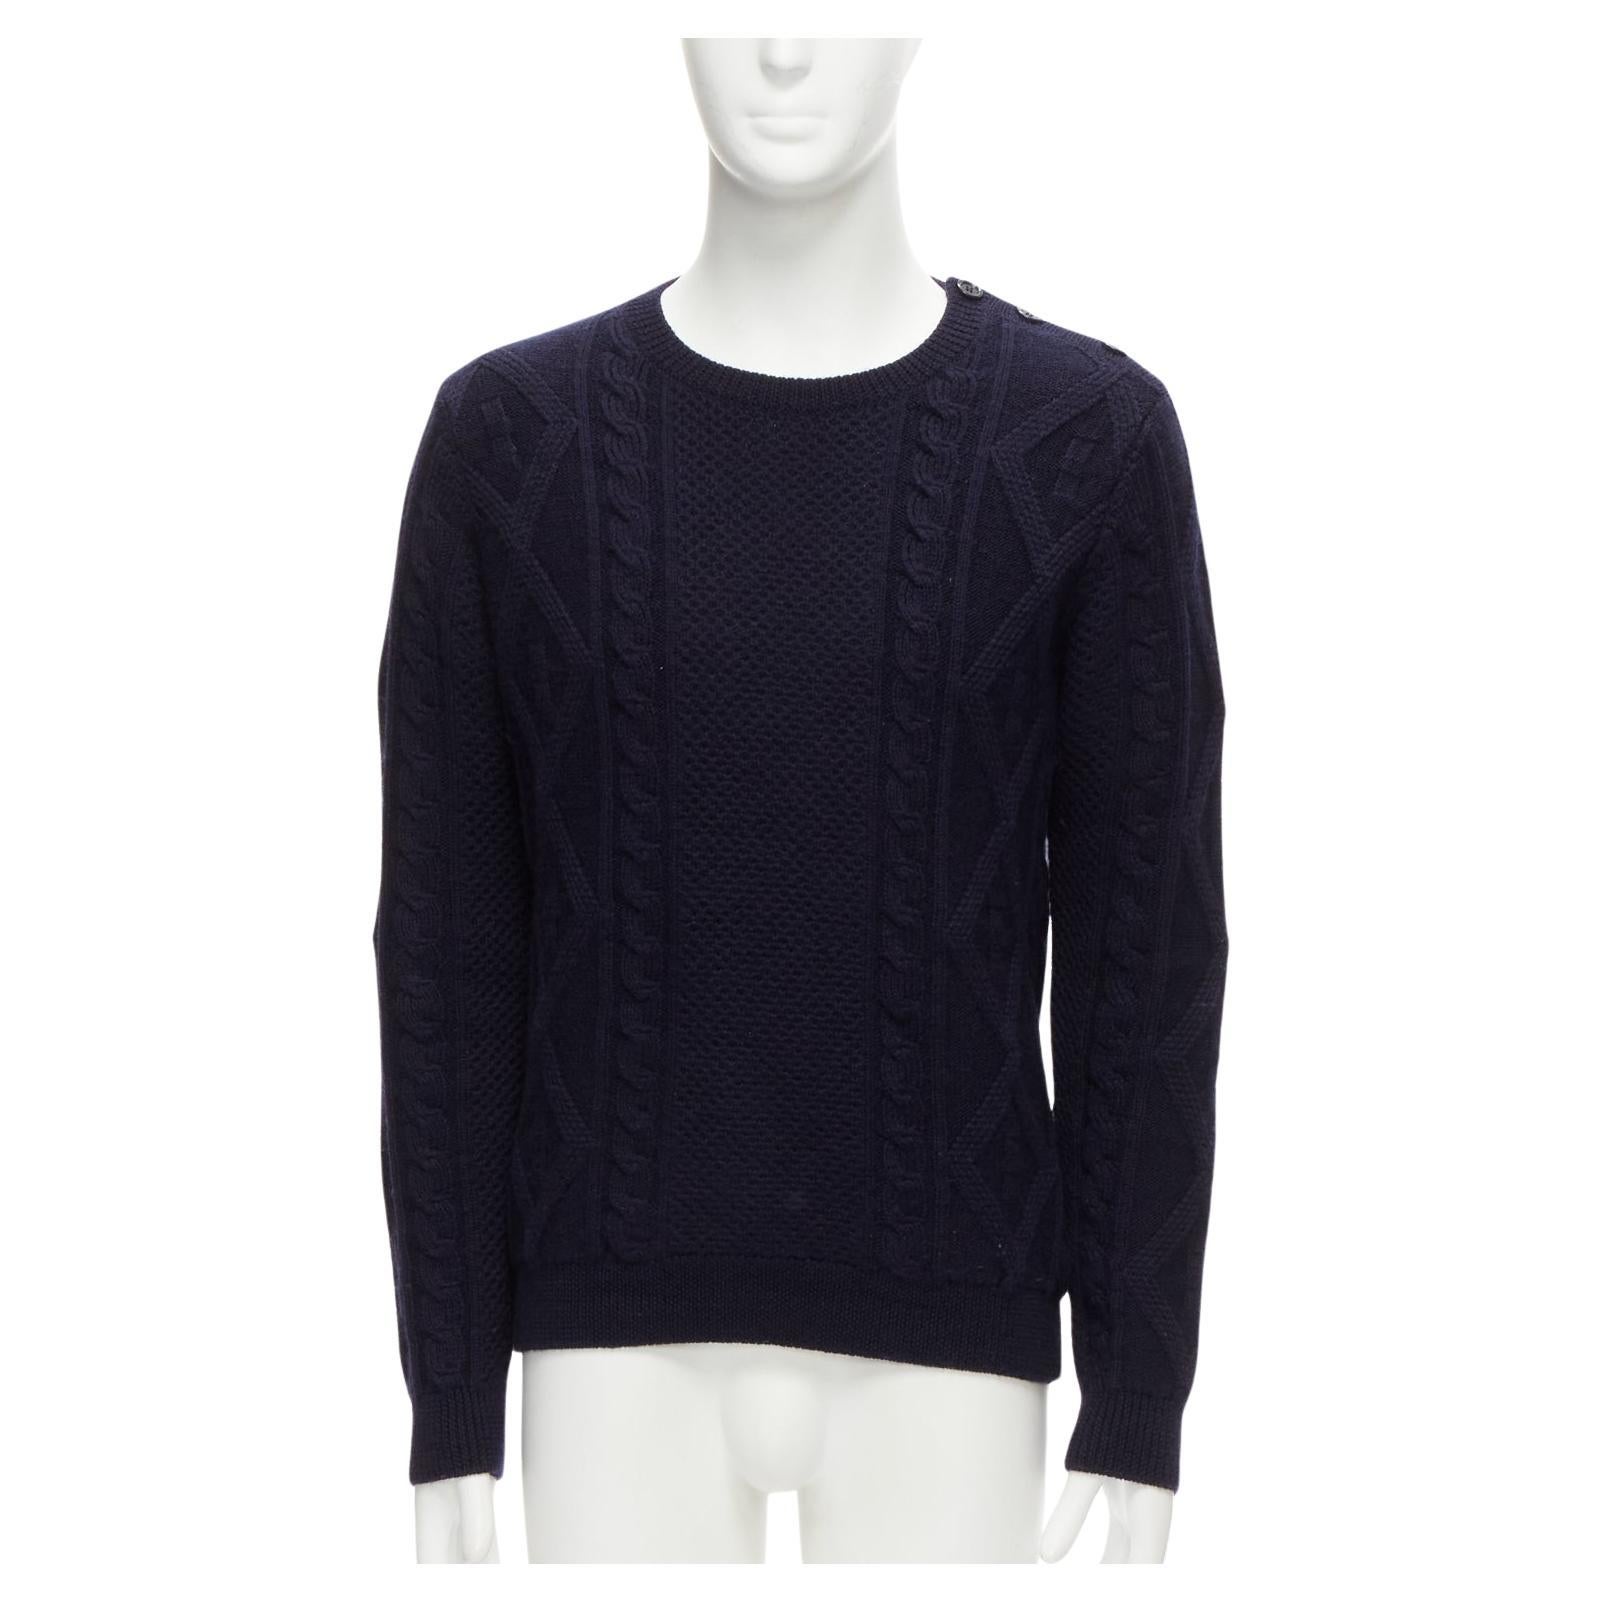 APC 100% wool navy blue fisherman cable knit crew neck long